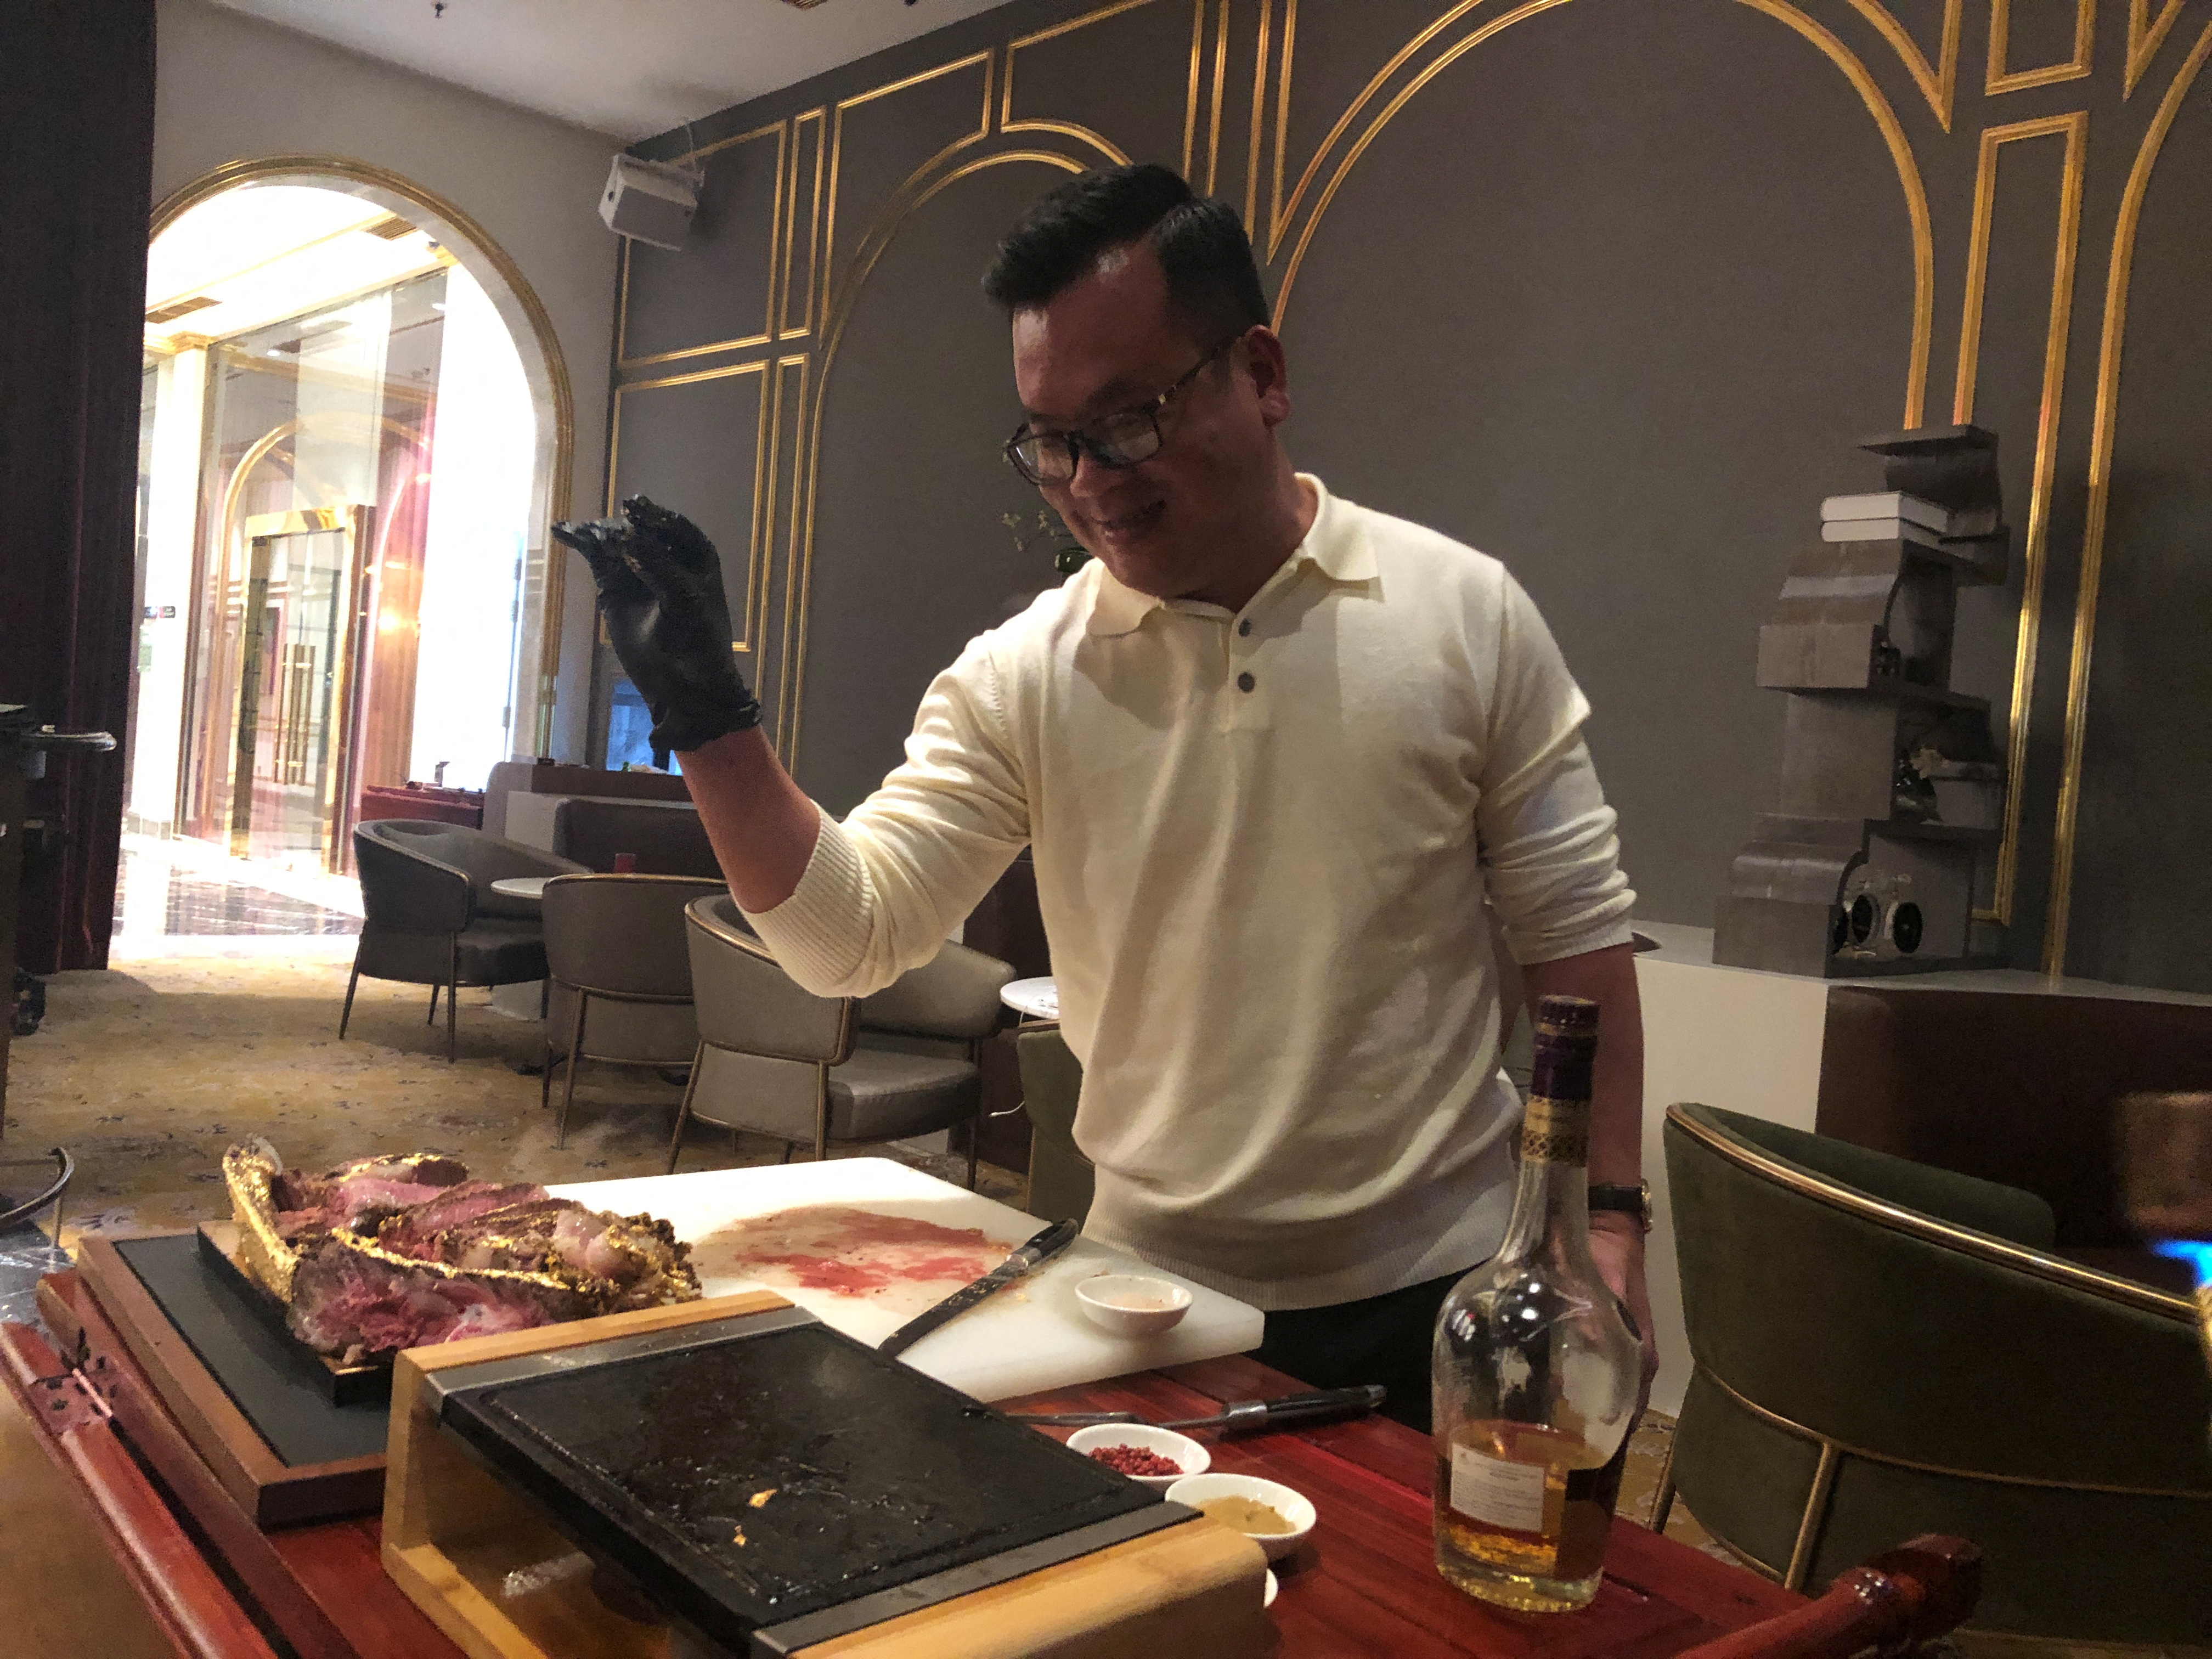 A chef prepares a gold leaf-coated steak, tapping in on a wave of publicity after a government minister was caught on camera being fed the dish at a London restaurant, at a Dolce By Wyndham Hanoi Golden Lake hotel, in Hanoi, Vietnam December 7, 2021. Picture taken December 7, 2021. REUTERS/Minh Nguyen